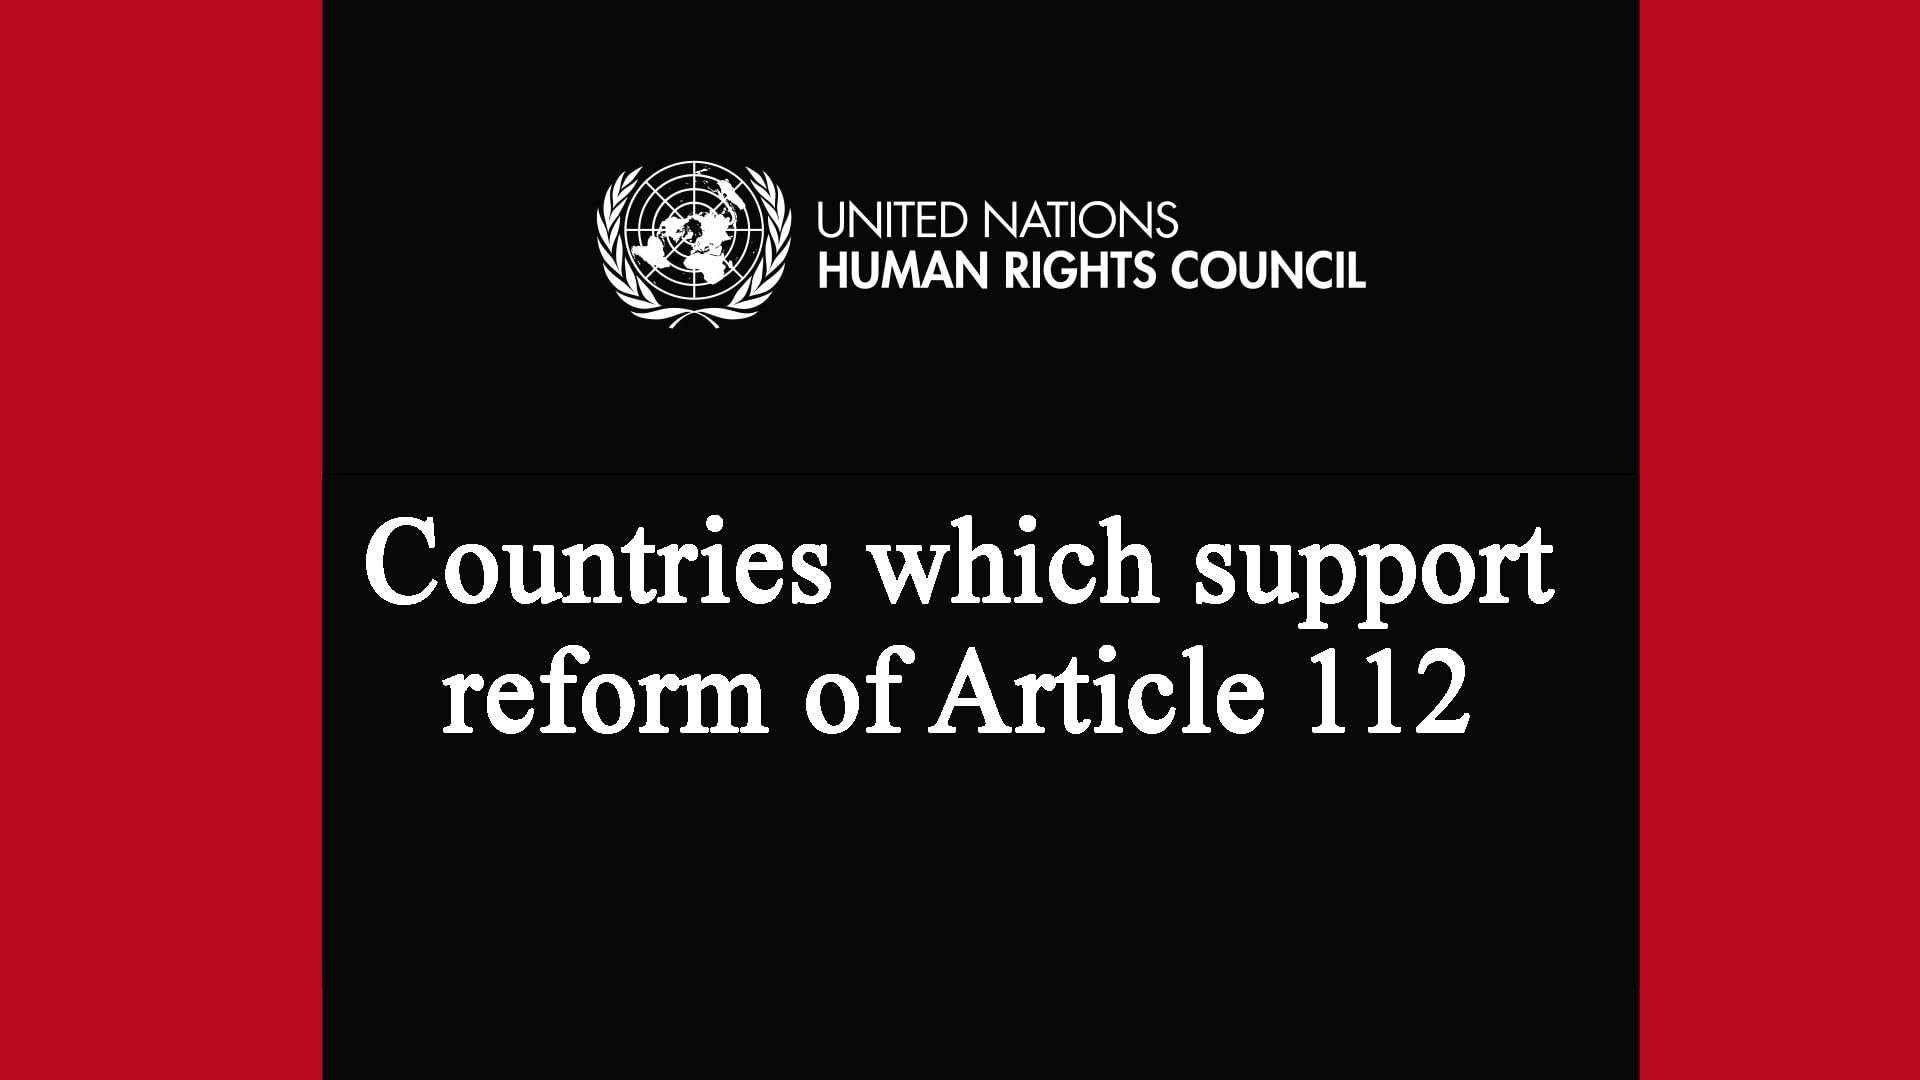 Countries which support reform of article 112